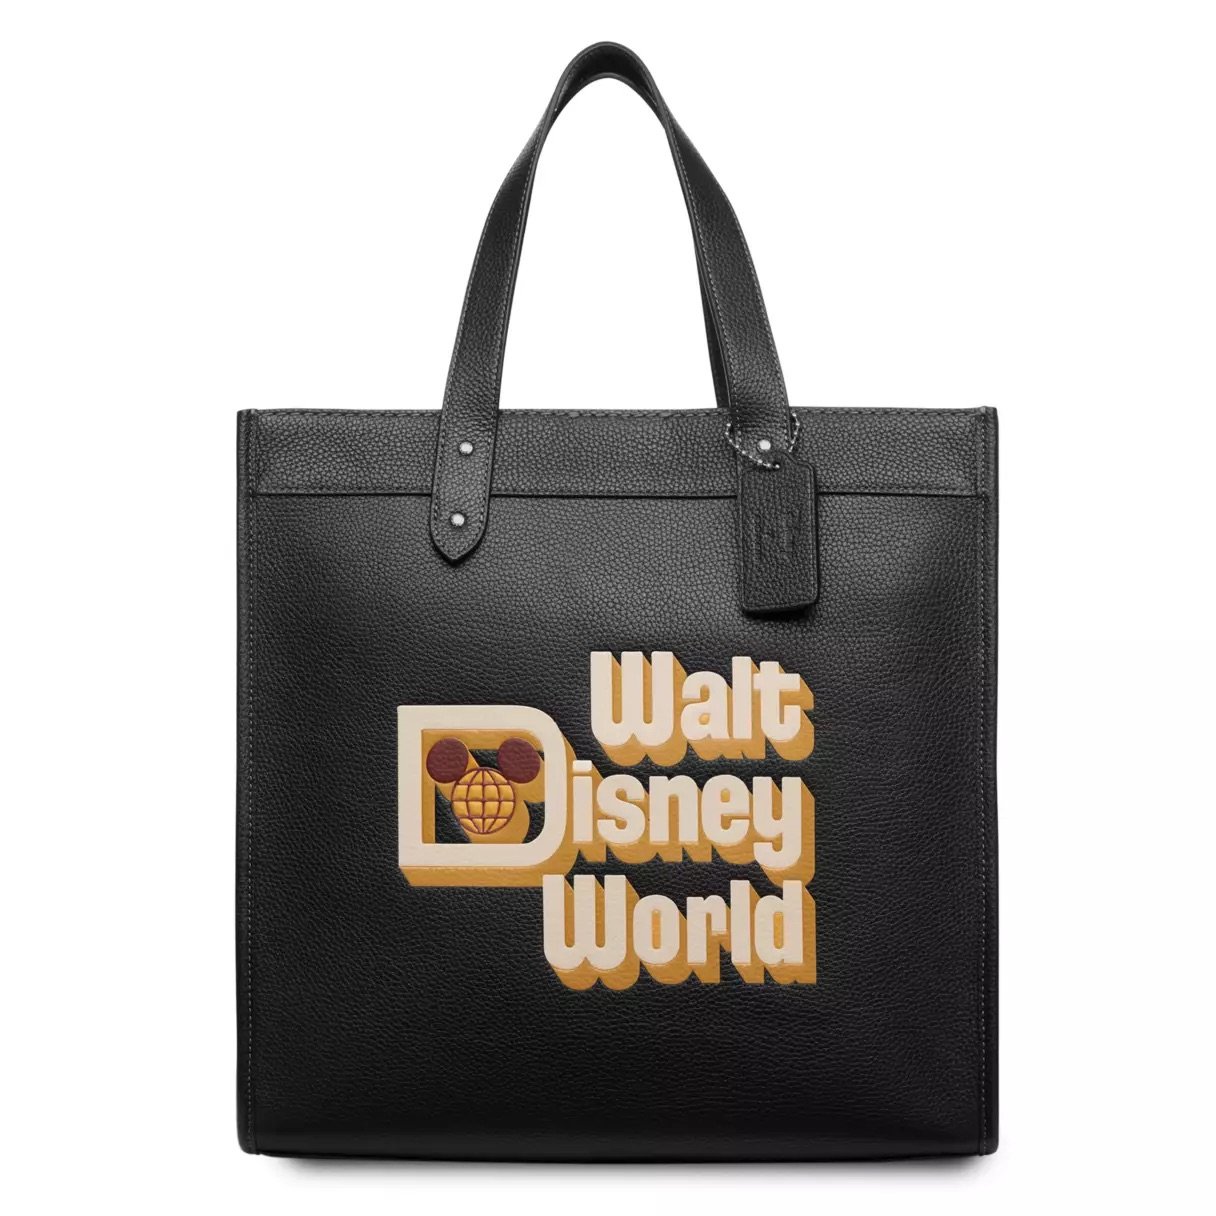 New Black Walt Disney World Bag Collection by Coach - WDW News Today